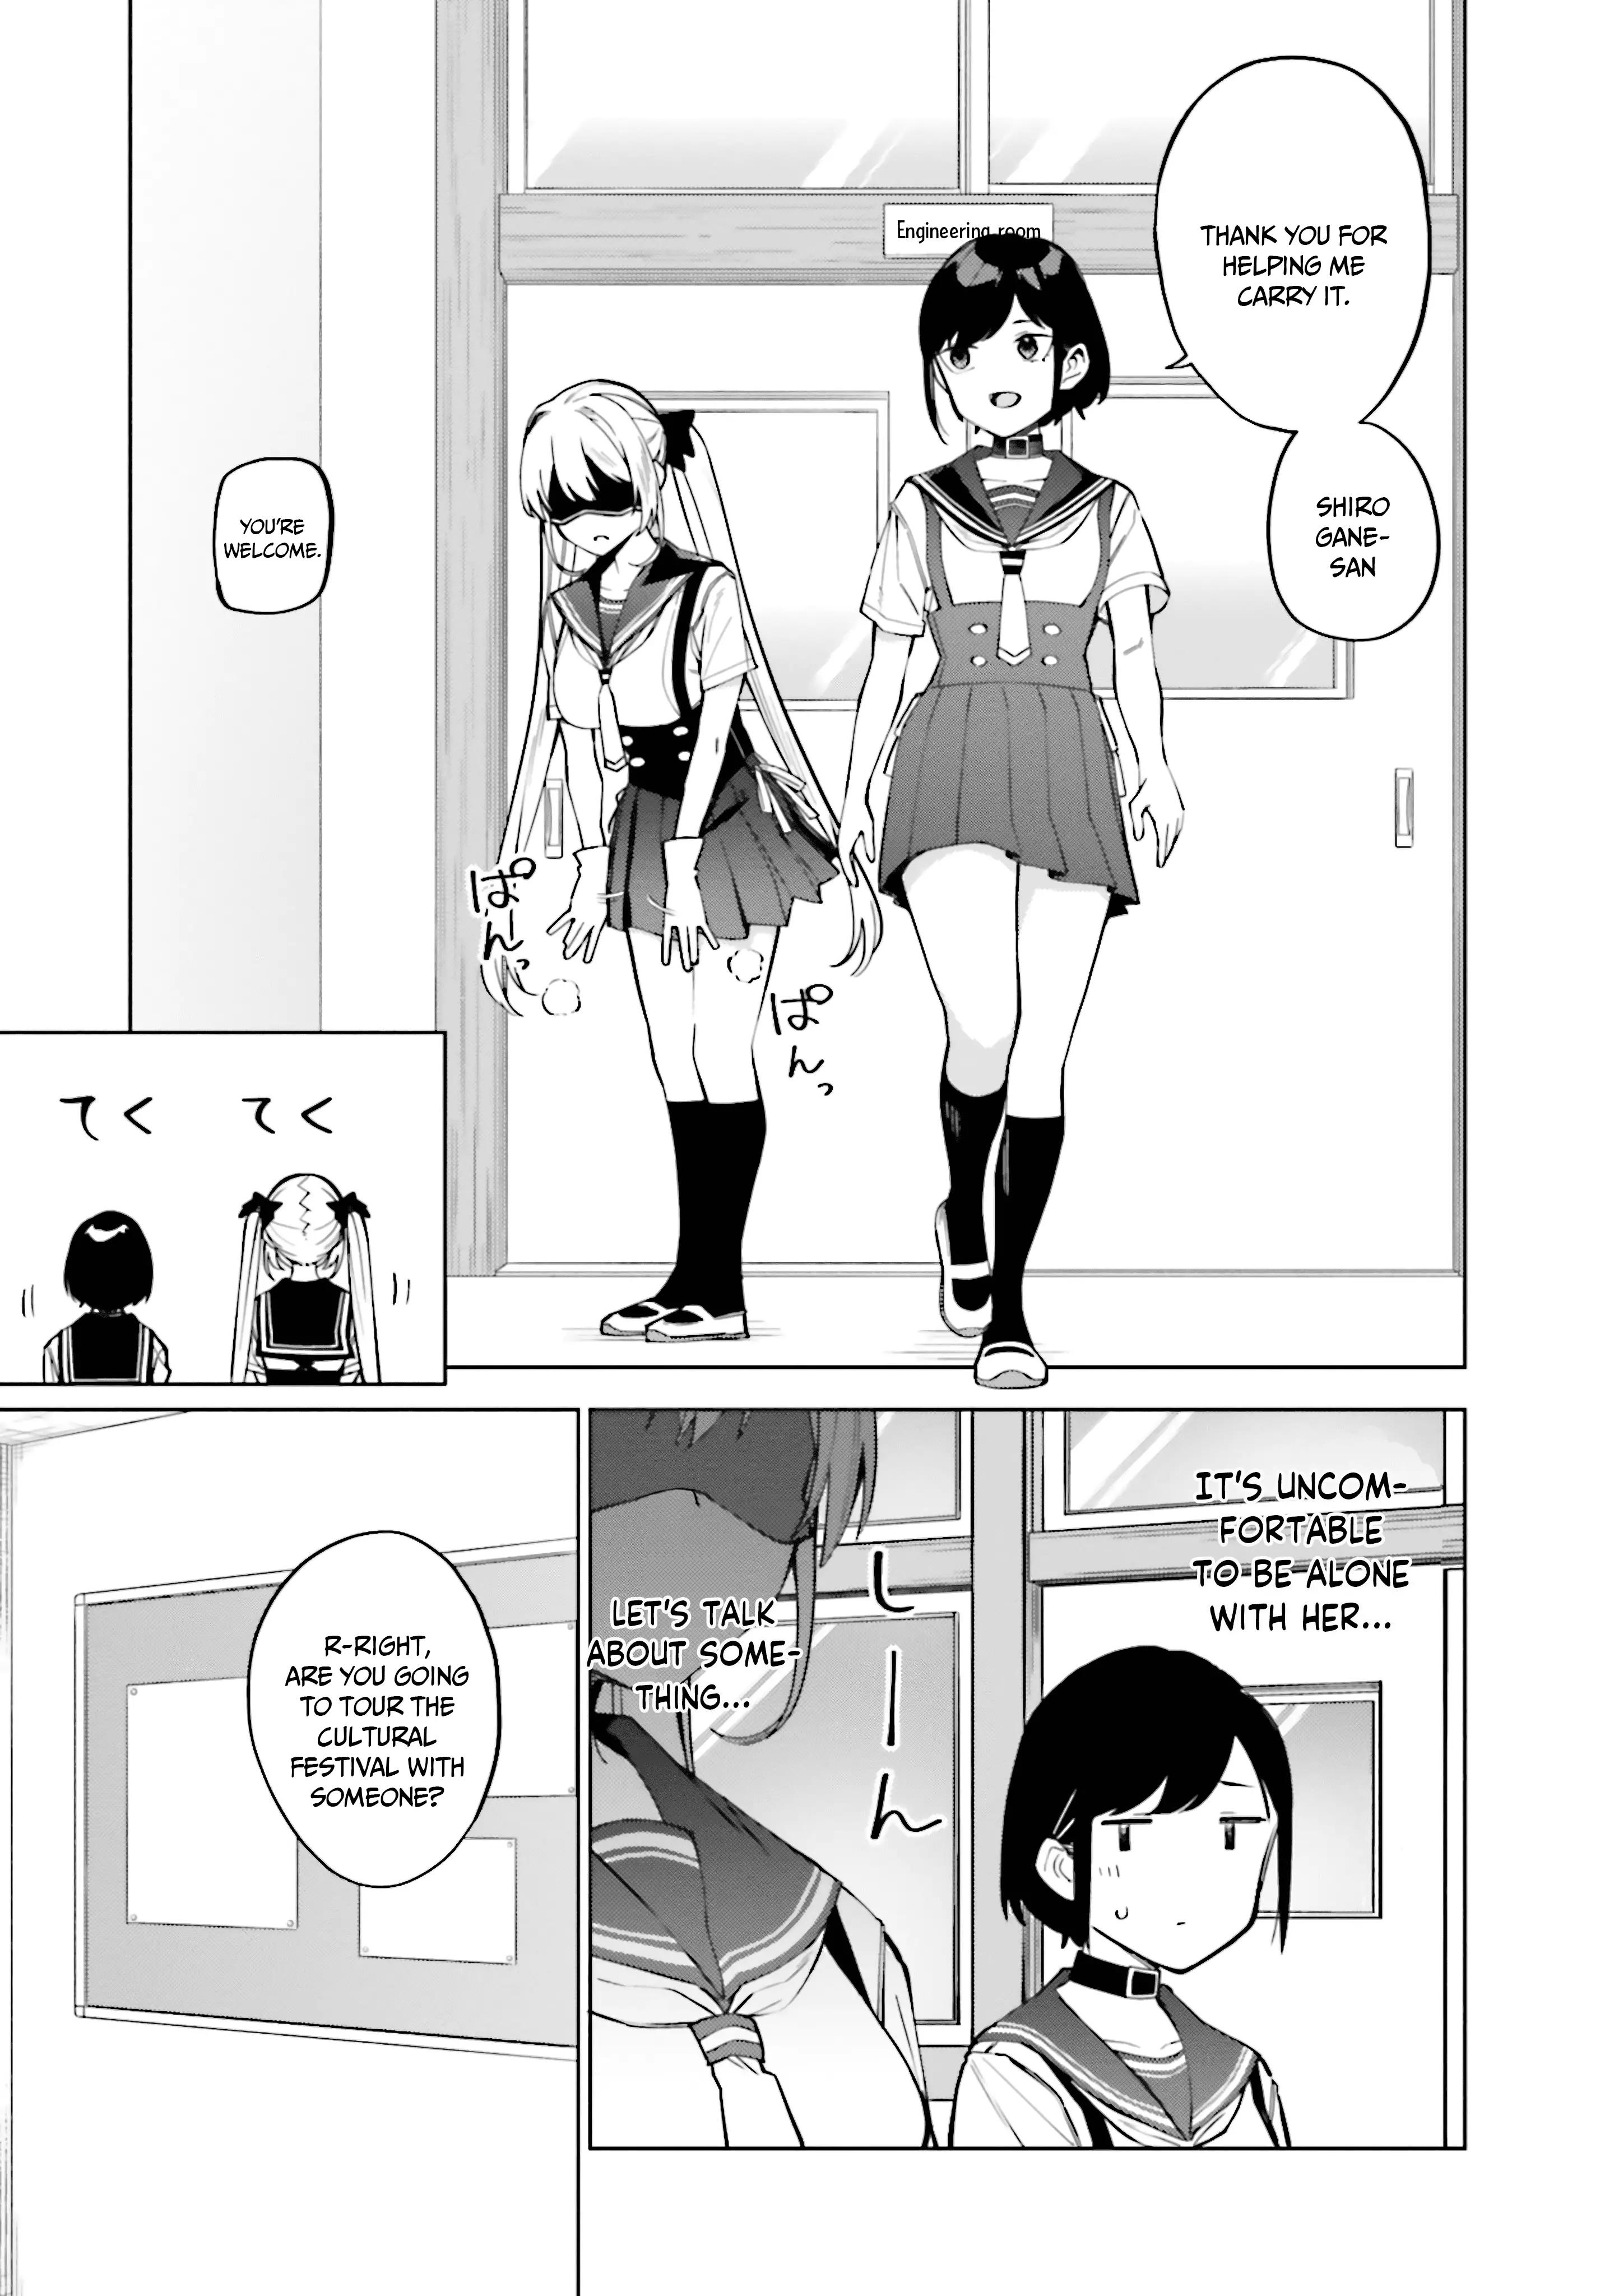 I Don't Understand Shirogane-San's Facial Expression At All - 14 page 14-f458e7b2